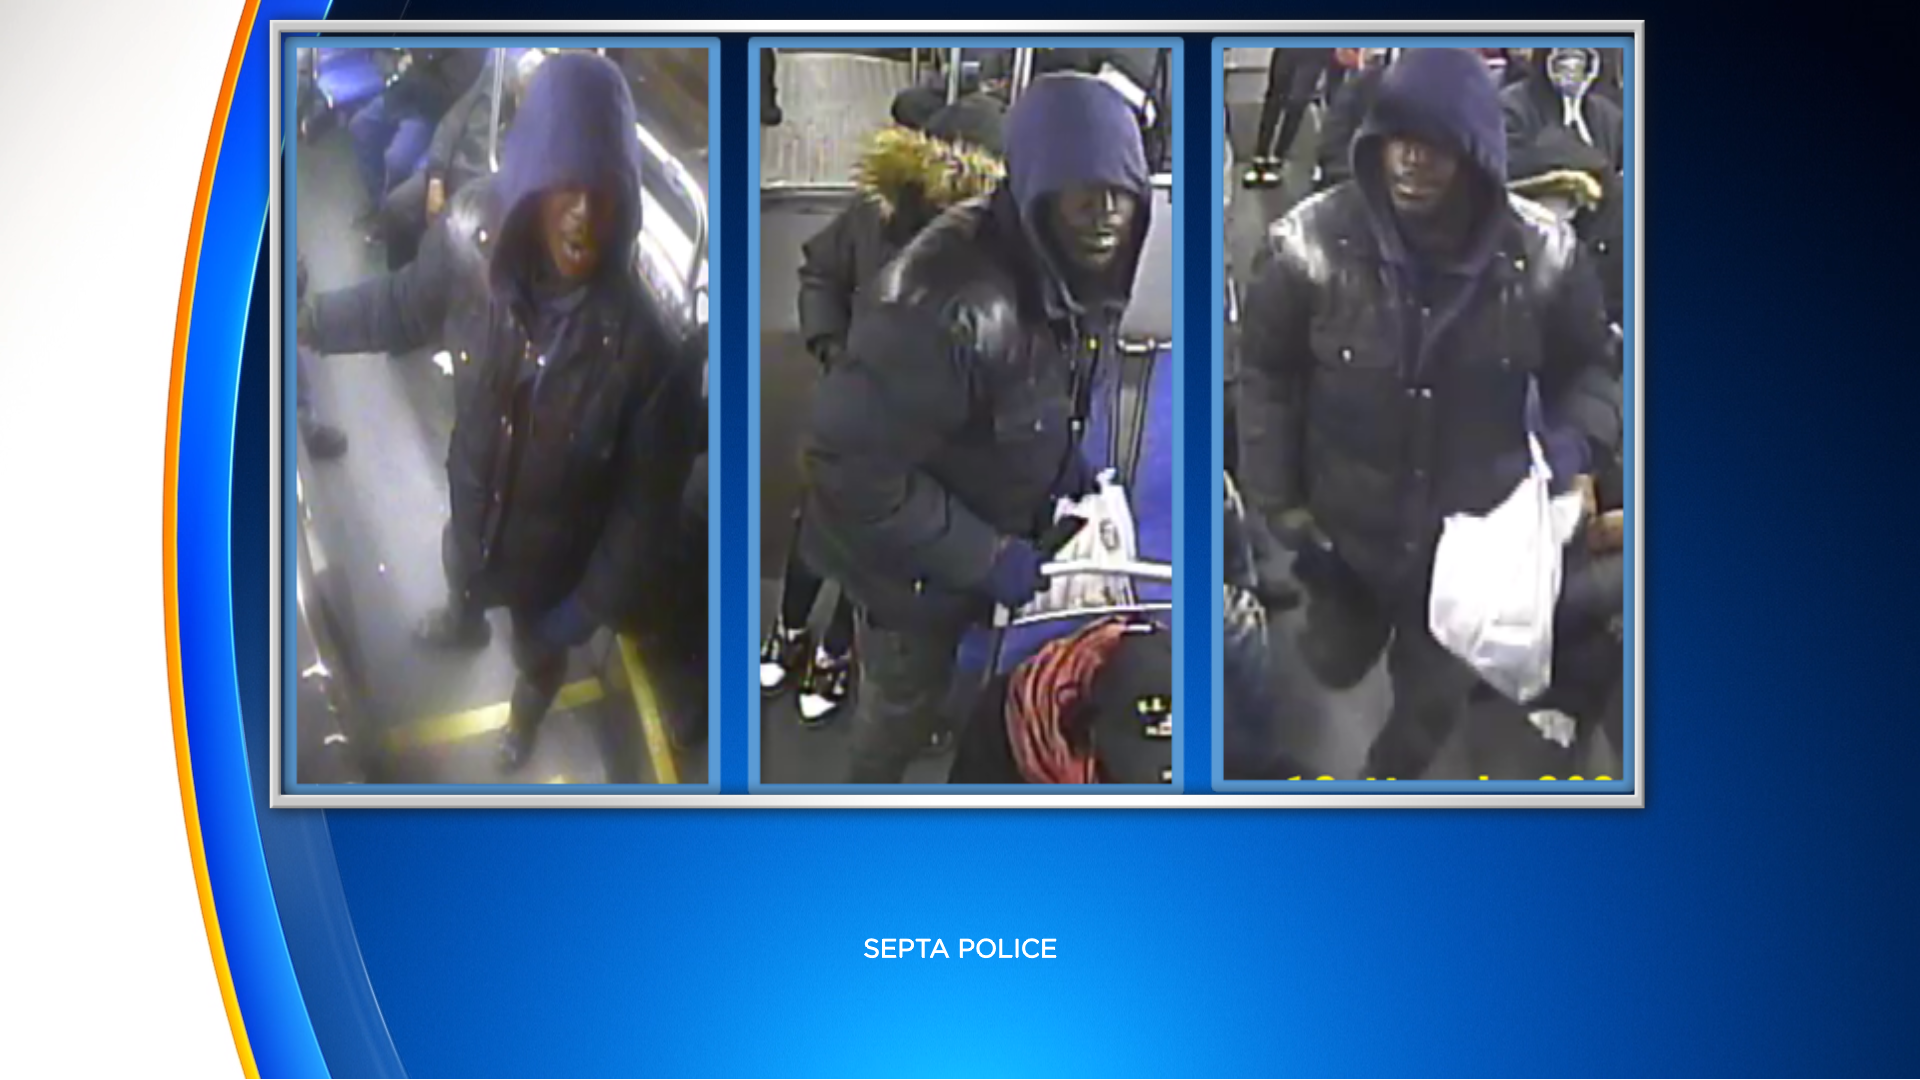 SEPTA Police Asking For Public’s Help To Identify Suspect Wanted For Allegedly Assaulting Pregnant Woman On Bus